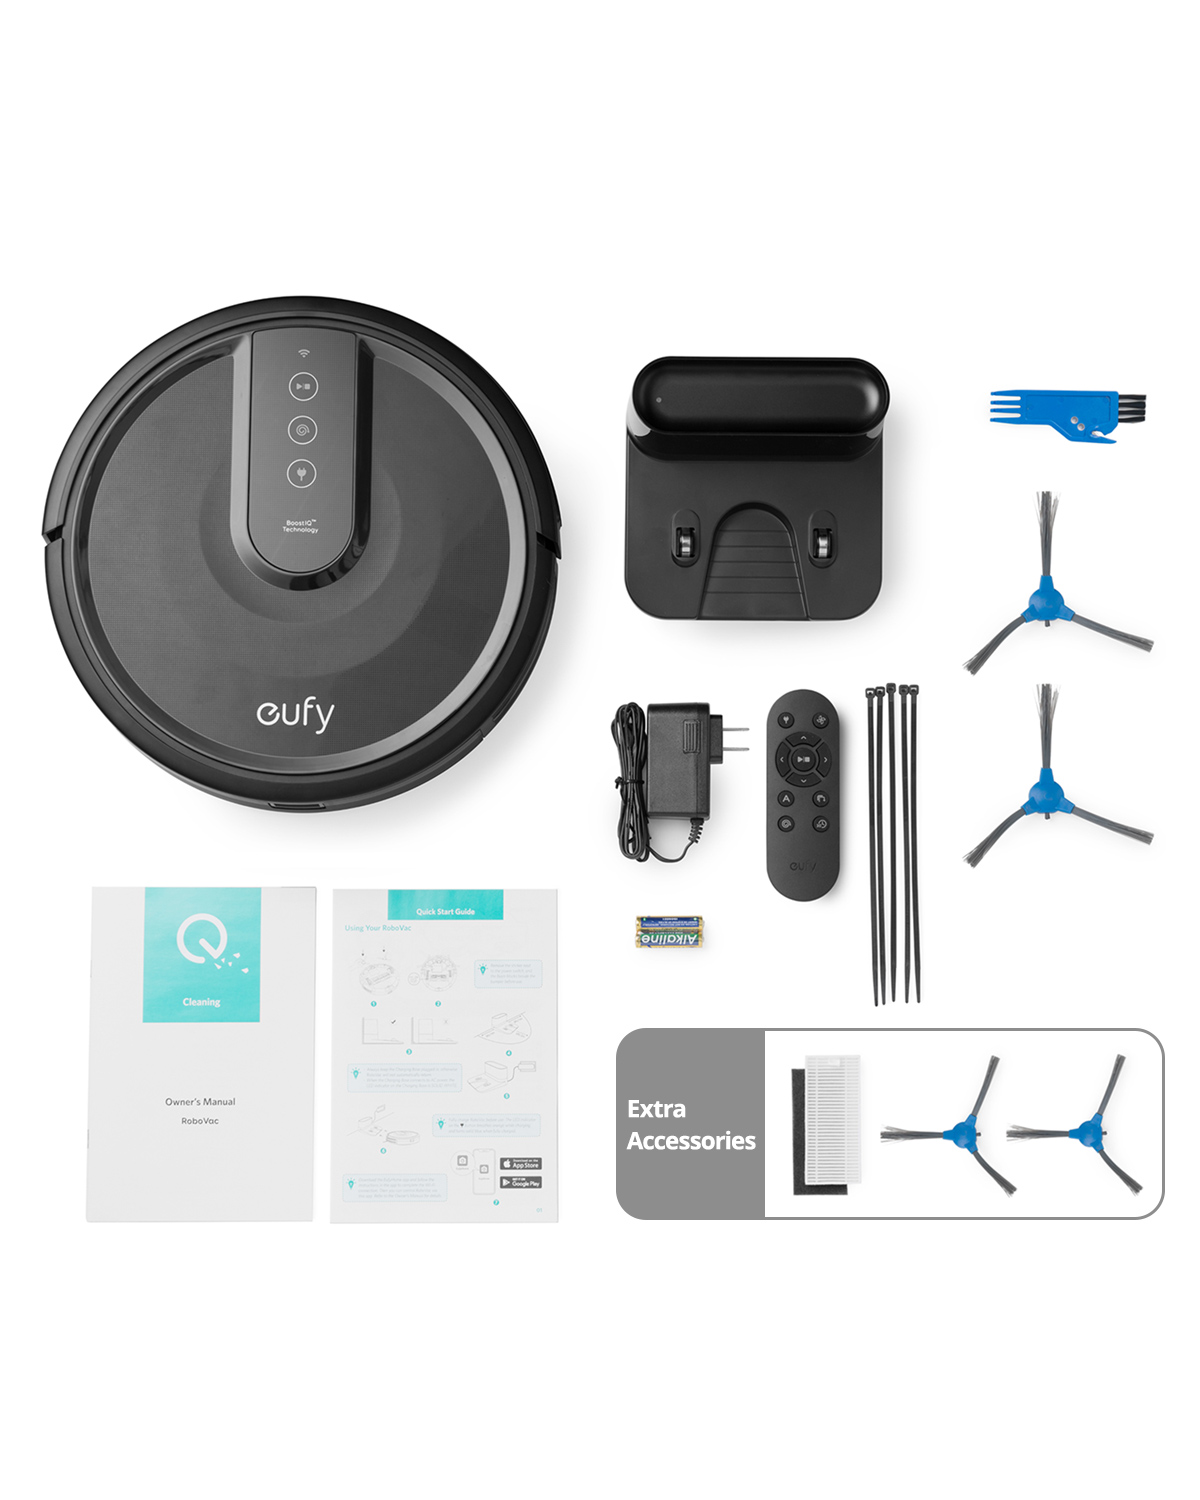 Anker eufy 25C Wi-Fi Connected Robot Vacuum, Great for Picking up Pet Hairs, Quiet, Slim - image 7 of 9